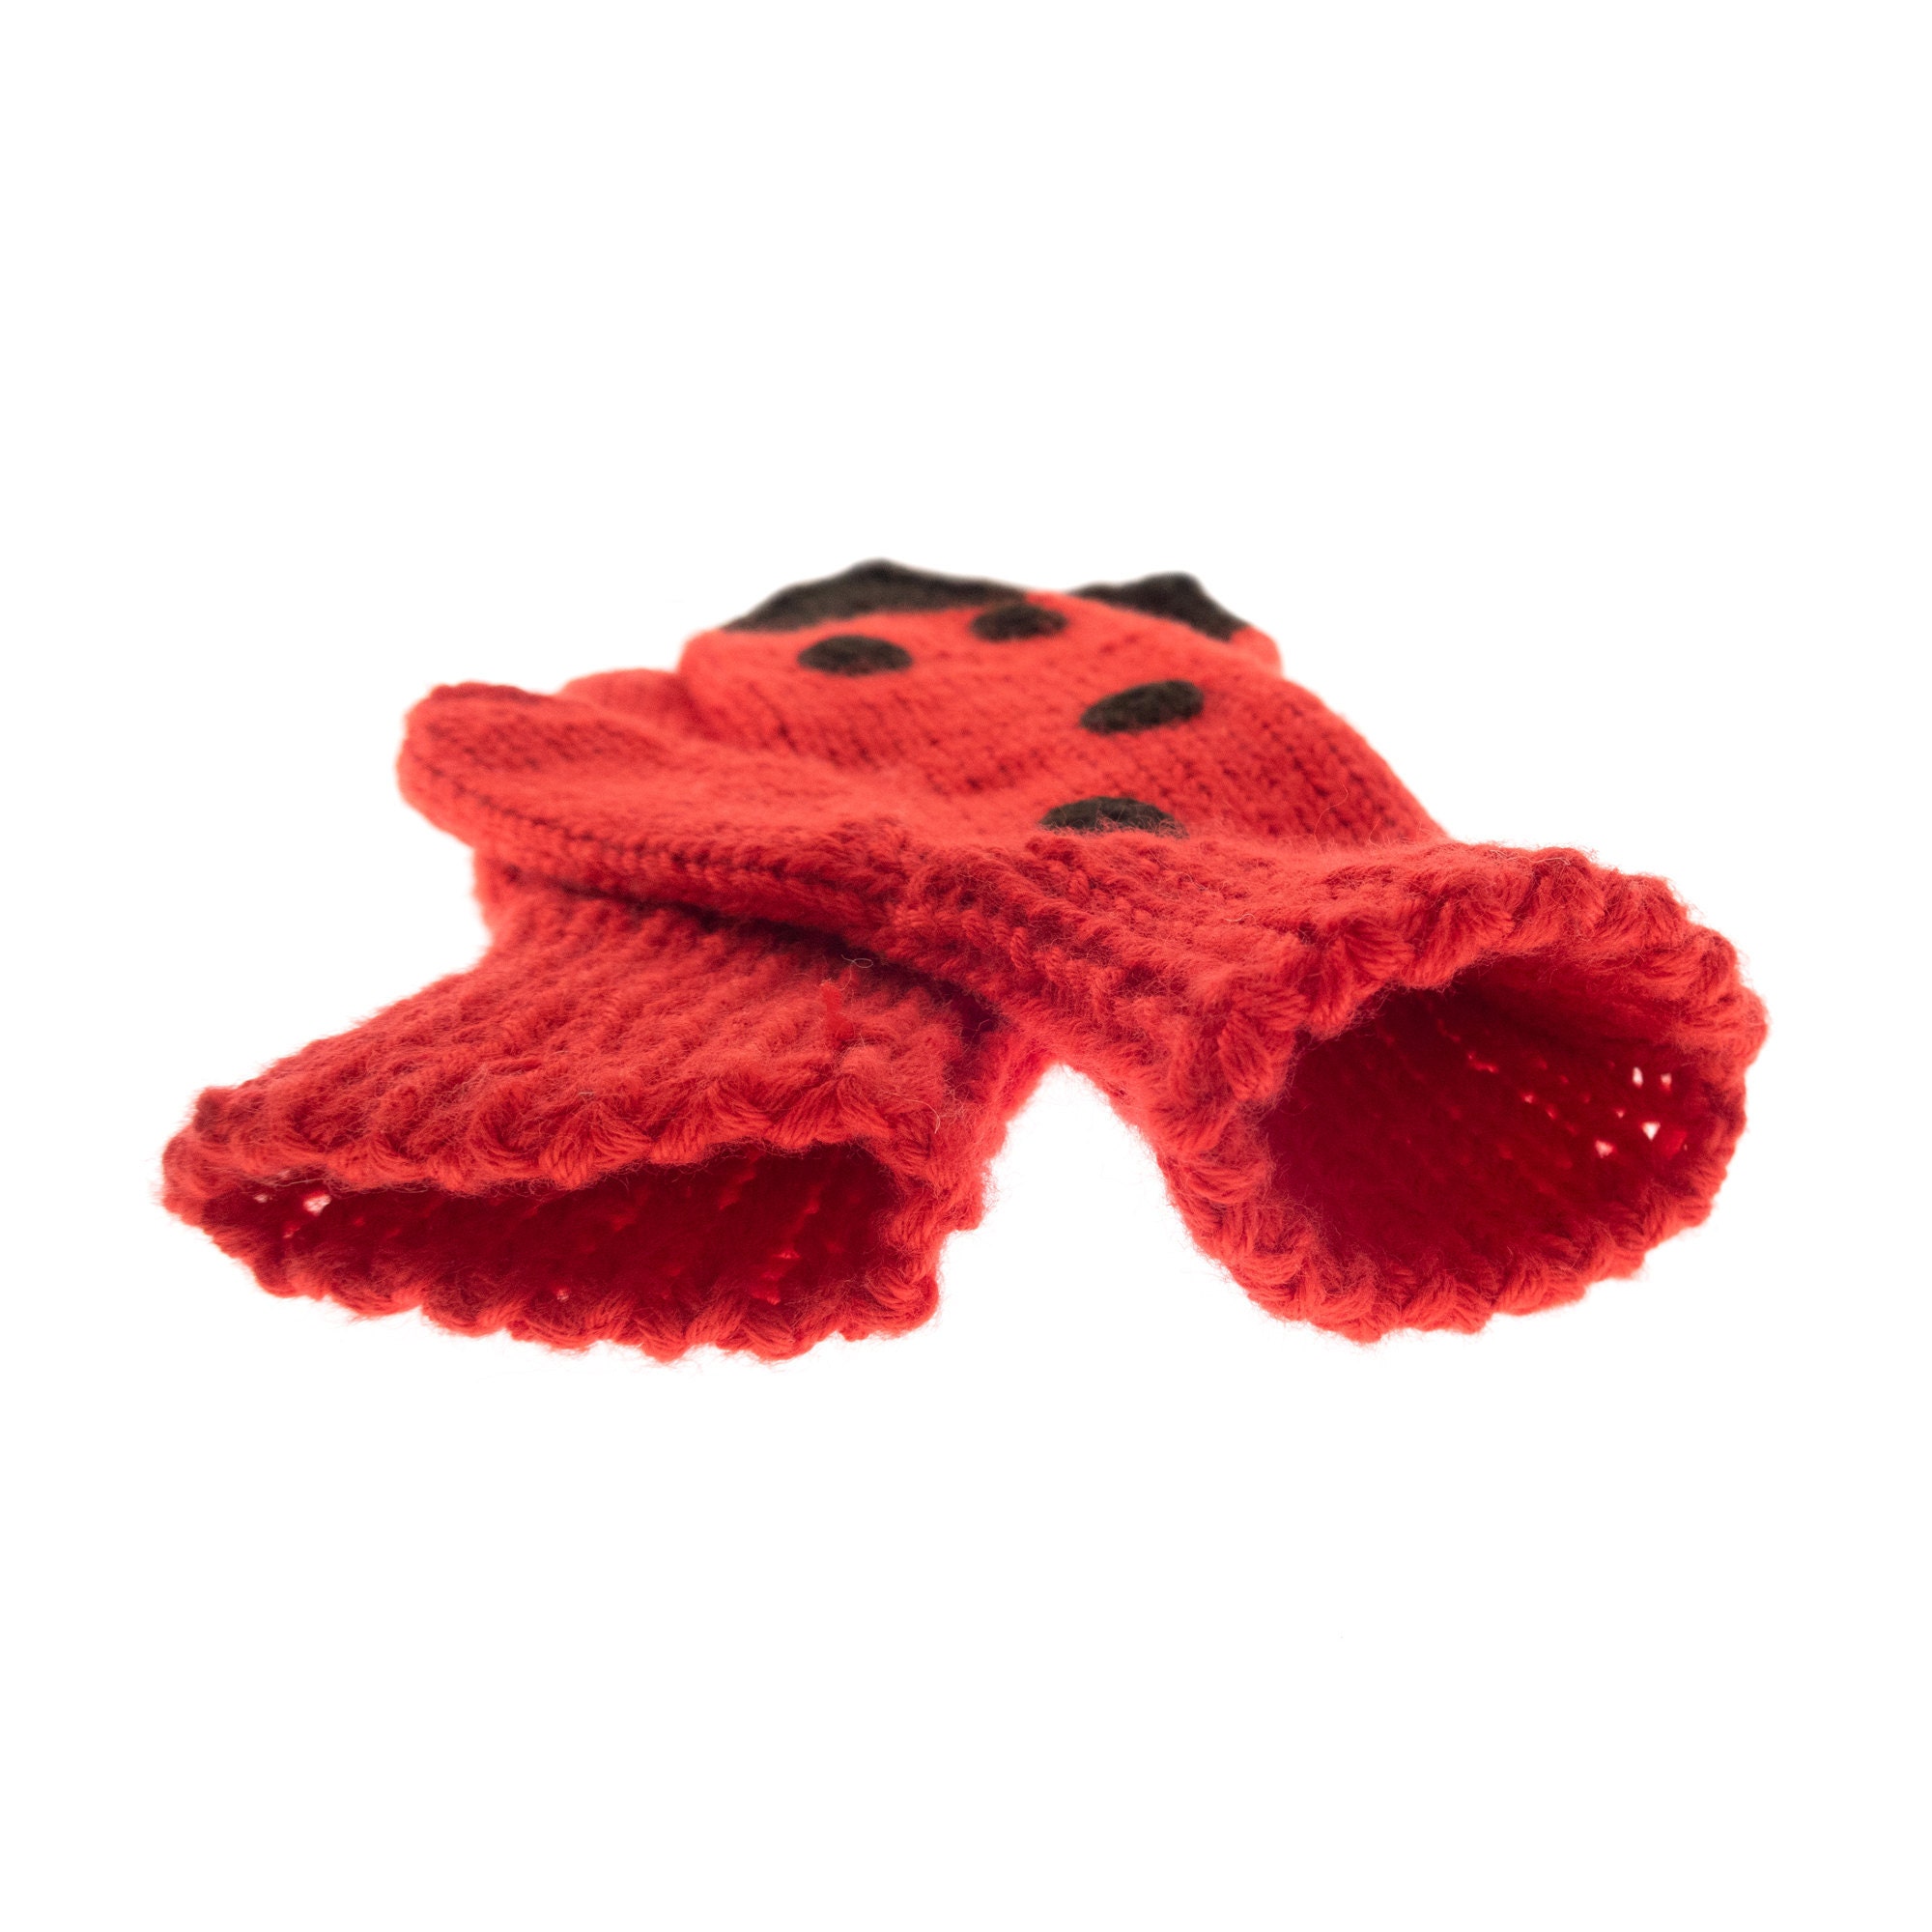 adults mittens, warm knitted winter mitts with ladybug theme